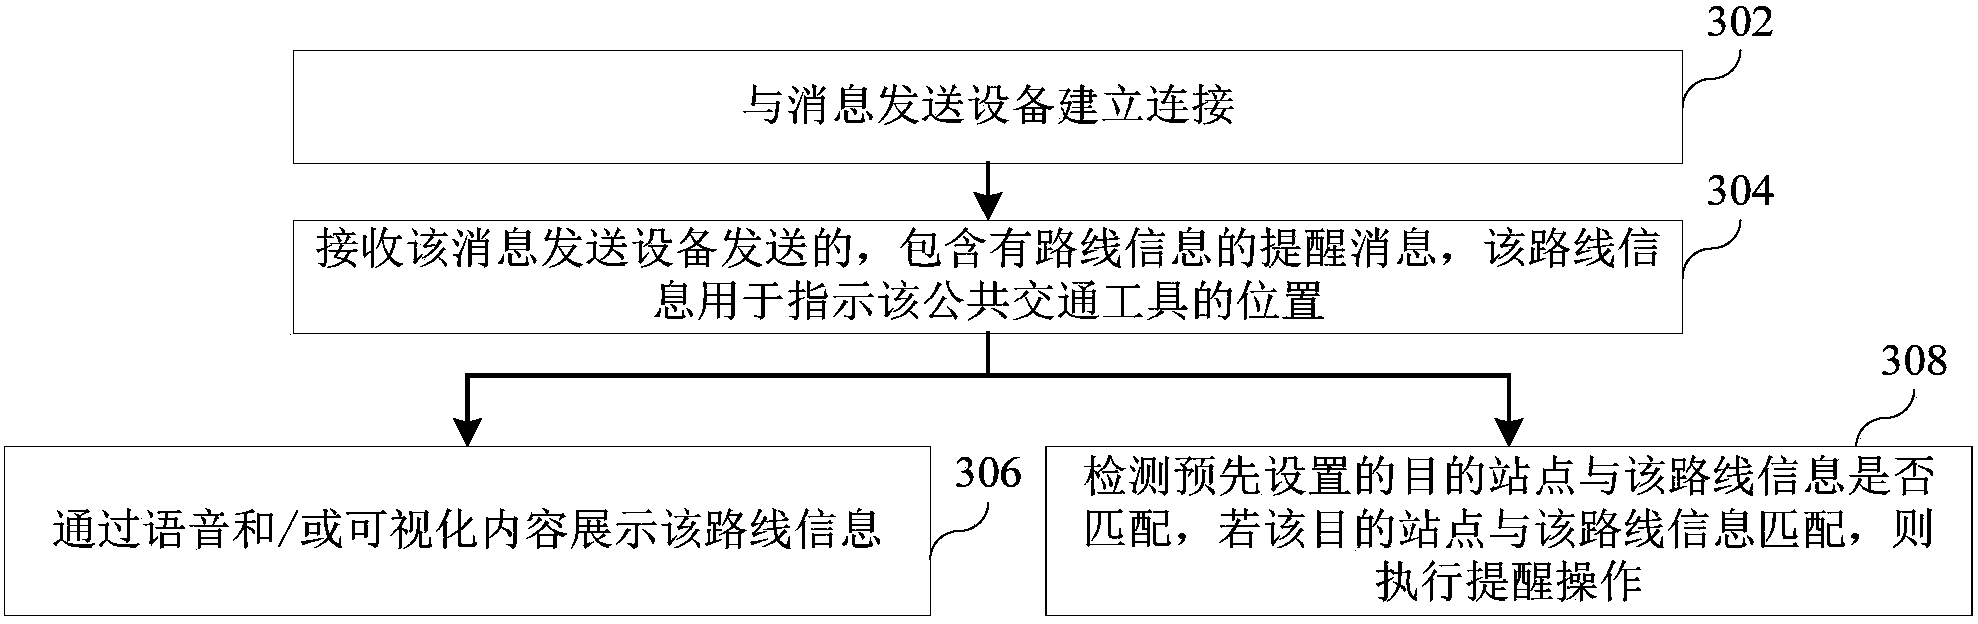 Route information prompting method and device